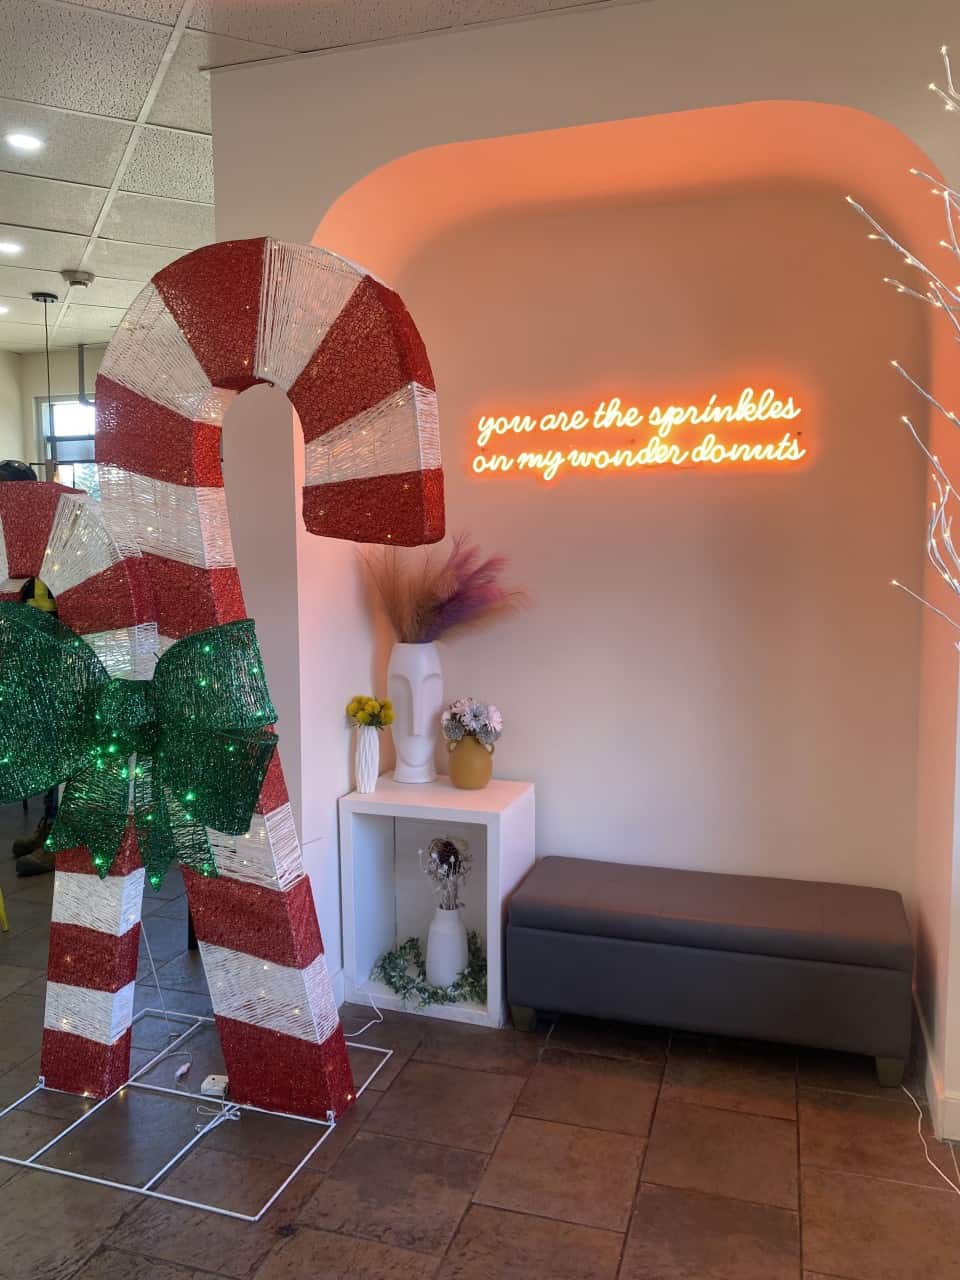 Christmas Photo Opportunity at Wonder Donuts - It is the Christmas season and Wonder Donuts has decorated their front entrance to give you that perfect photo opt! 